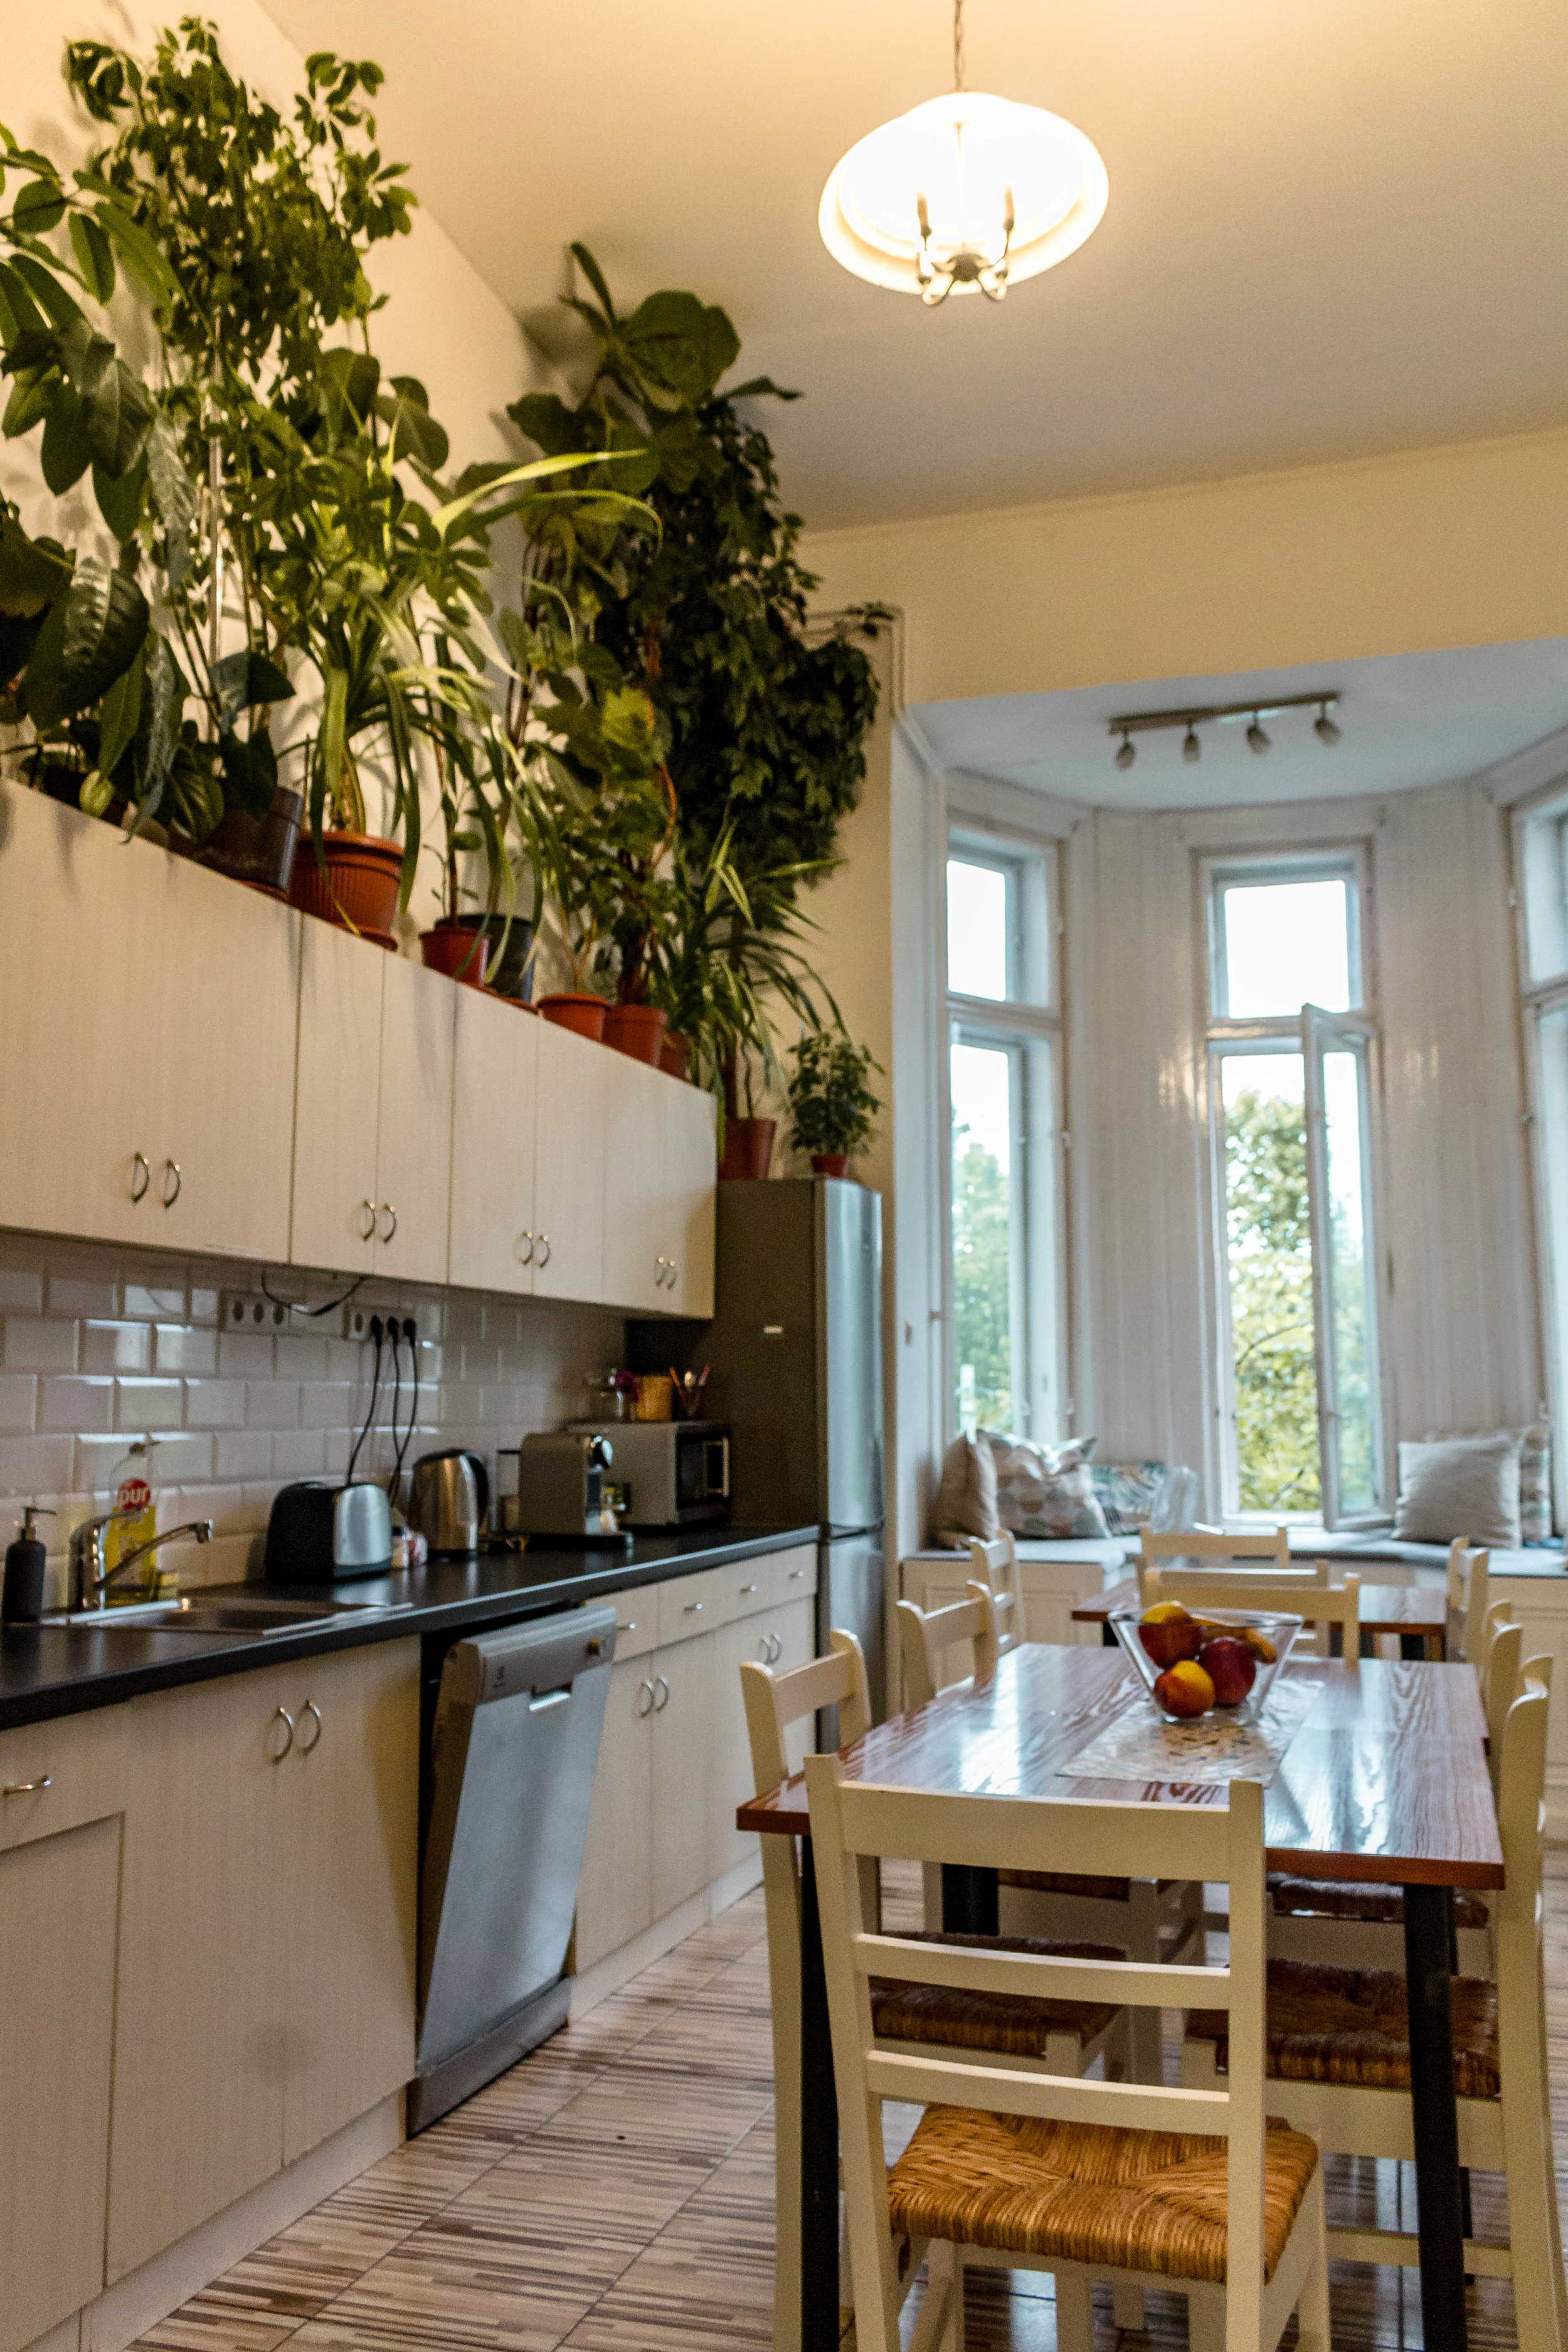 communal kitchen at an airbnb in Budapest, Hungary